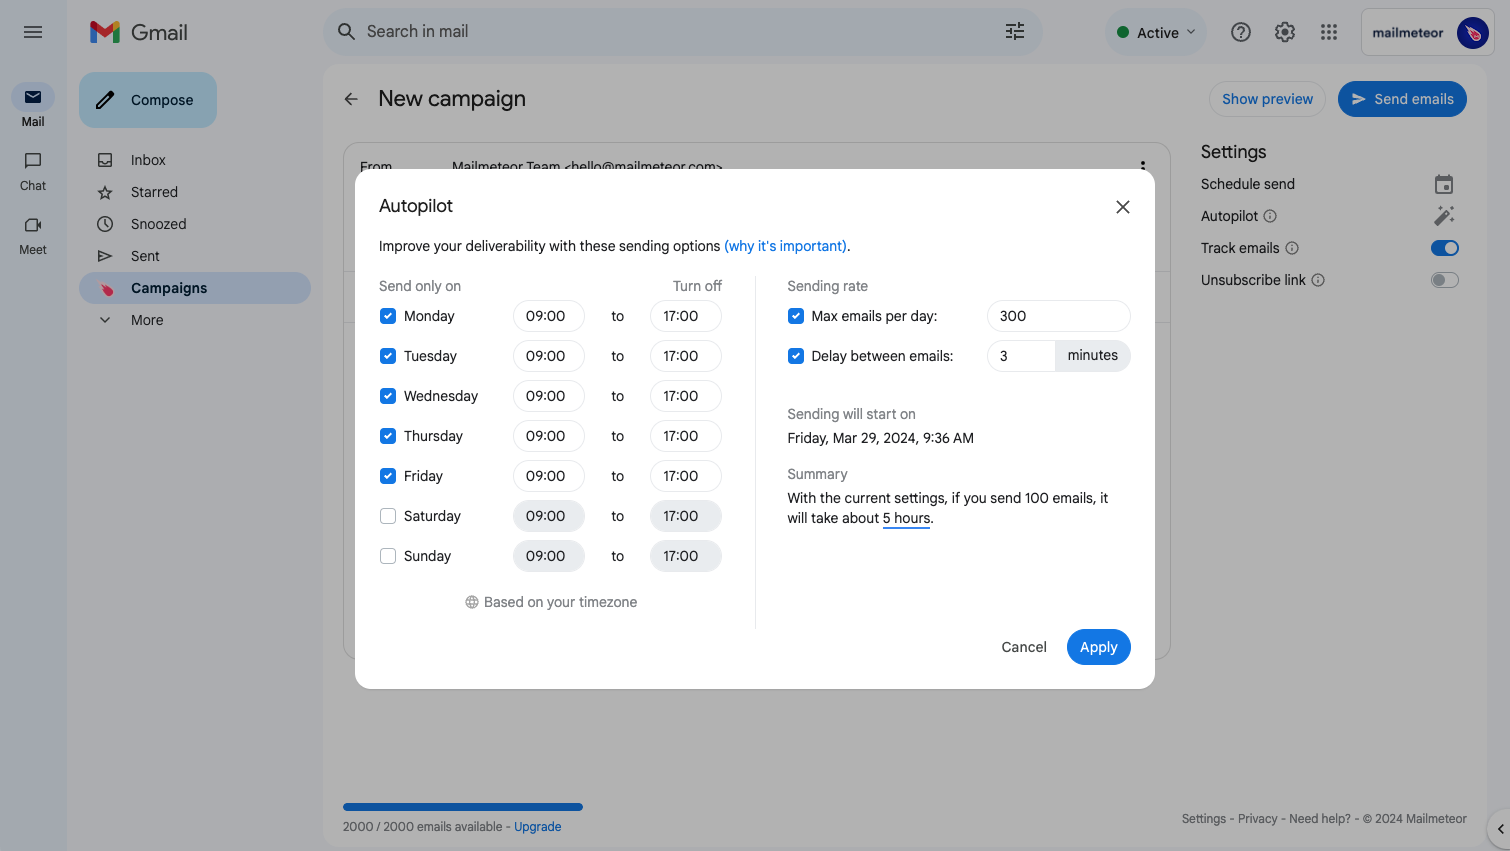 Mailmeteor for Gmail: Send with Autopilot